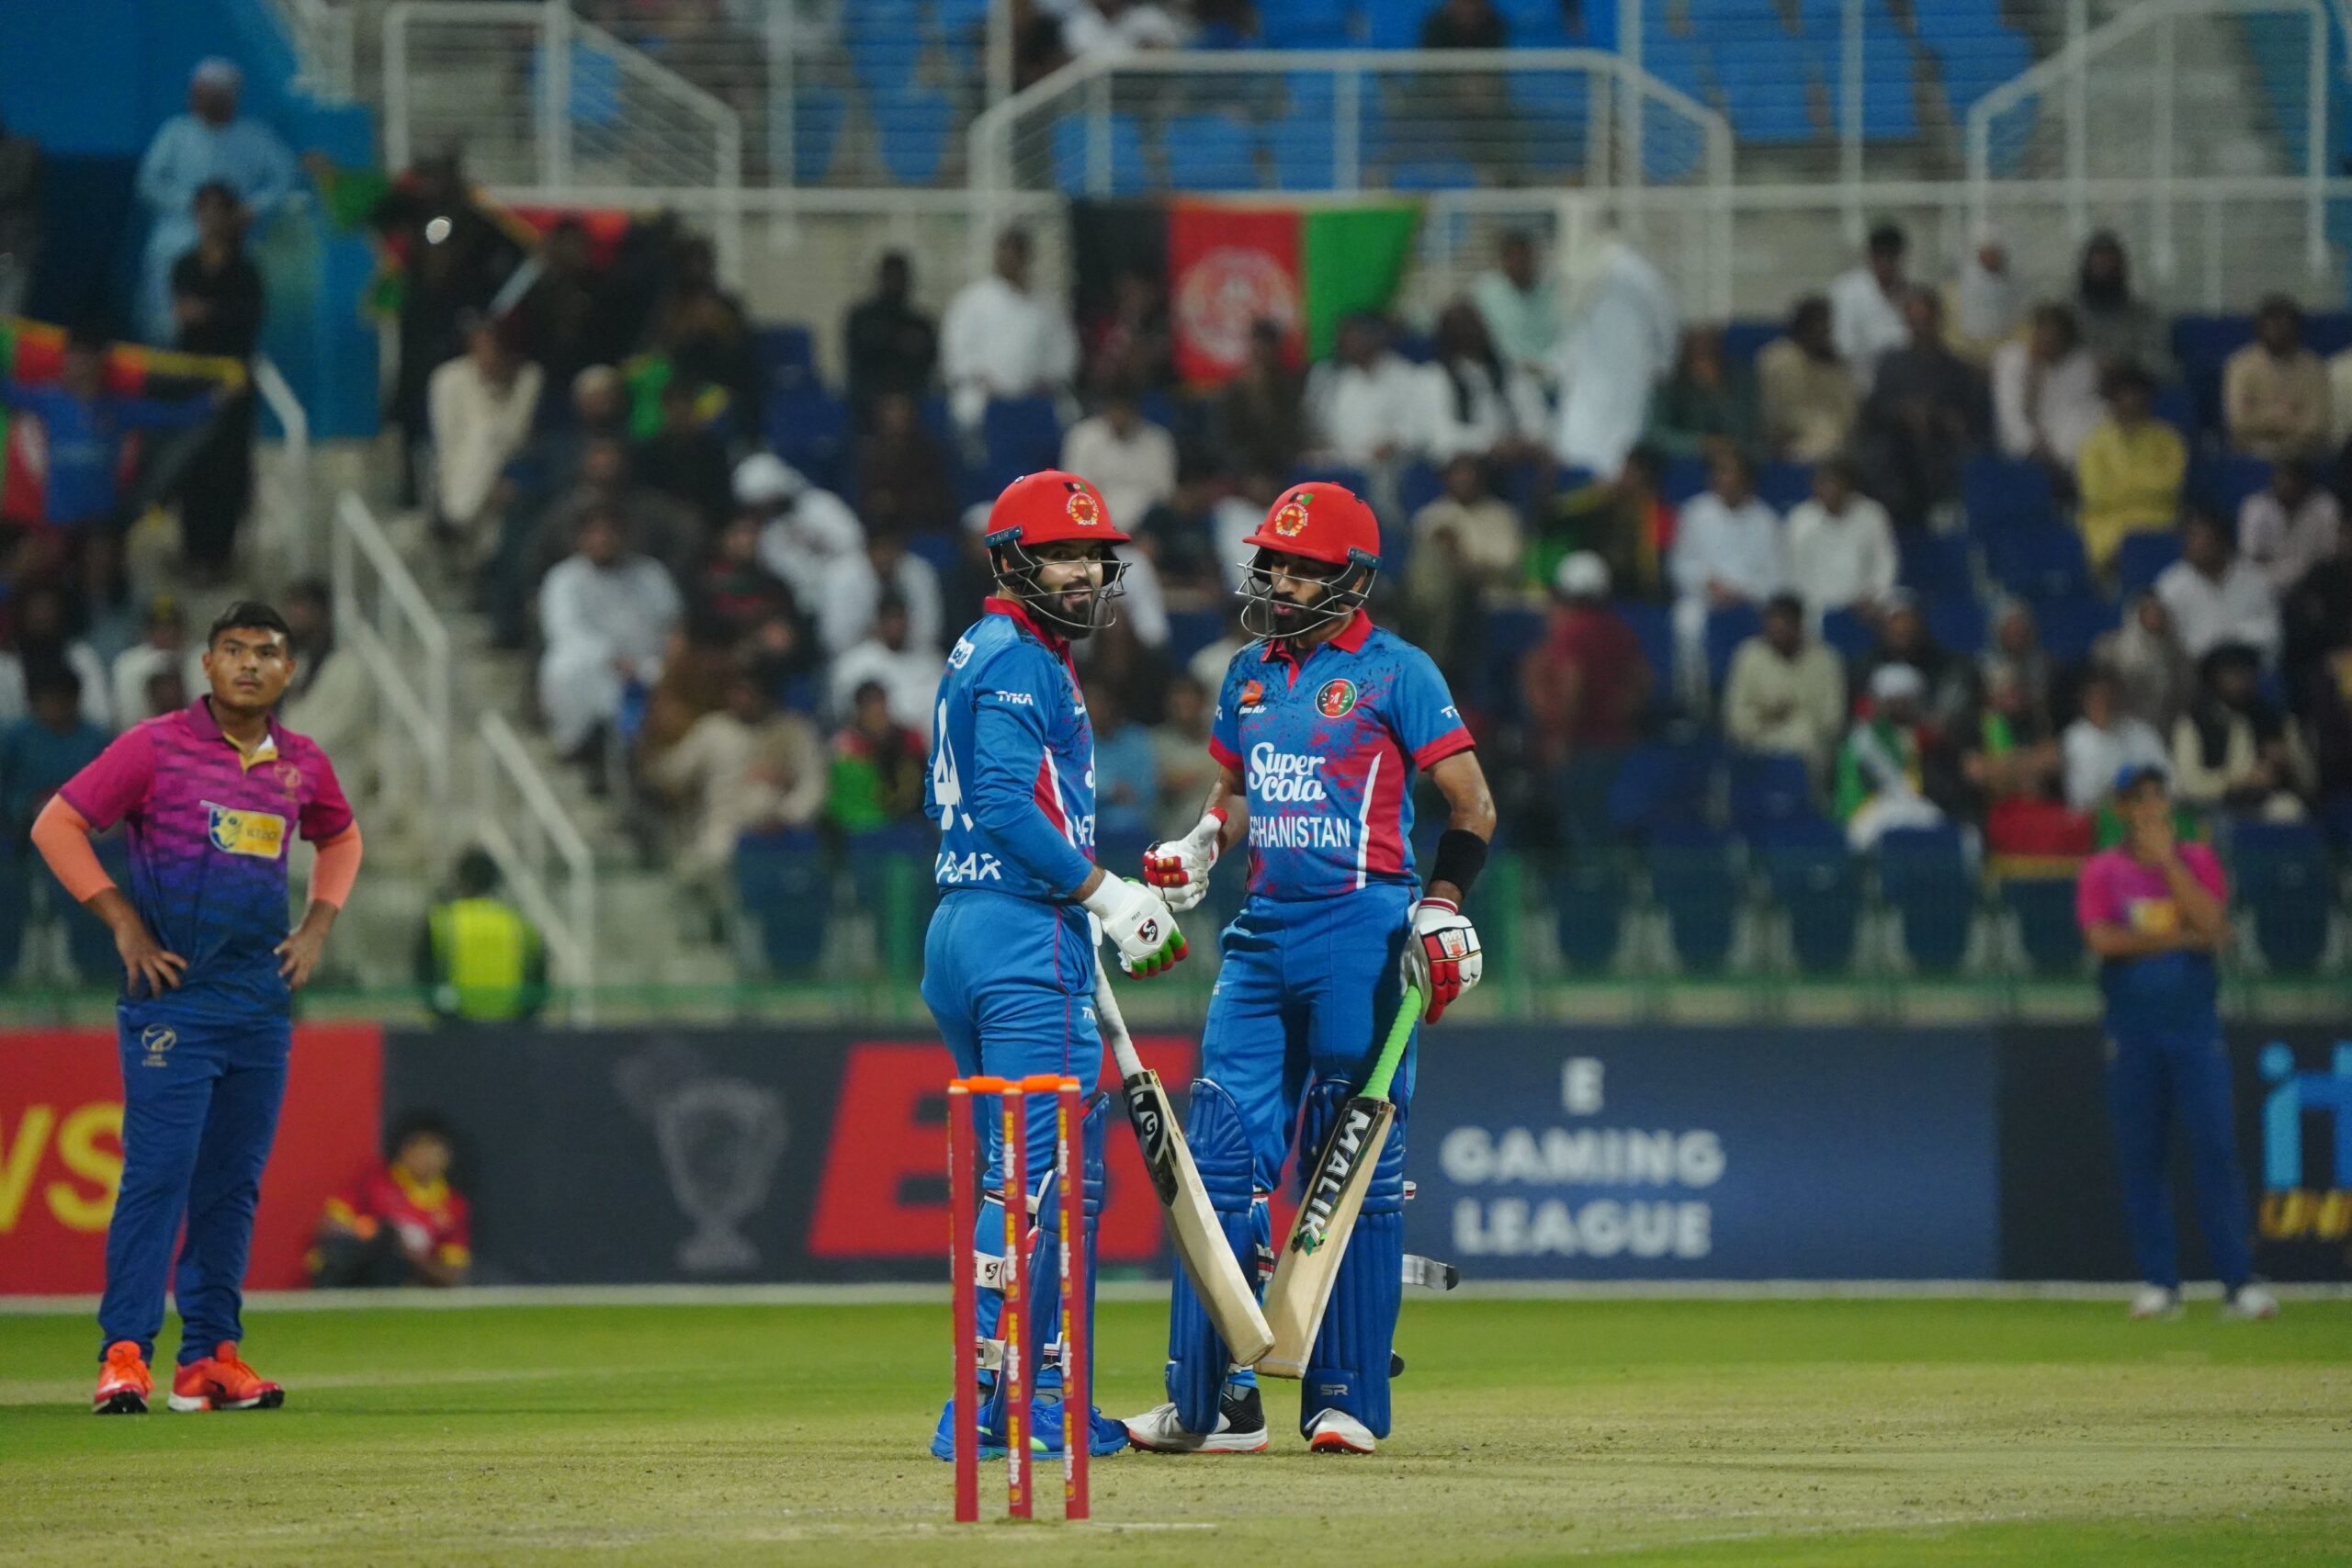 Afghanistan start their UAE tour with a win